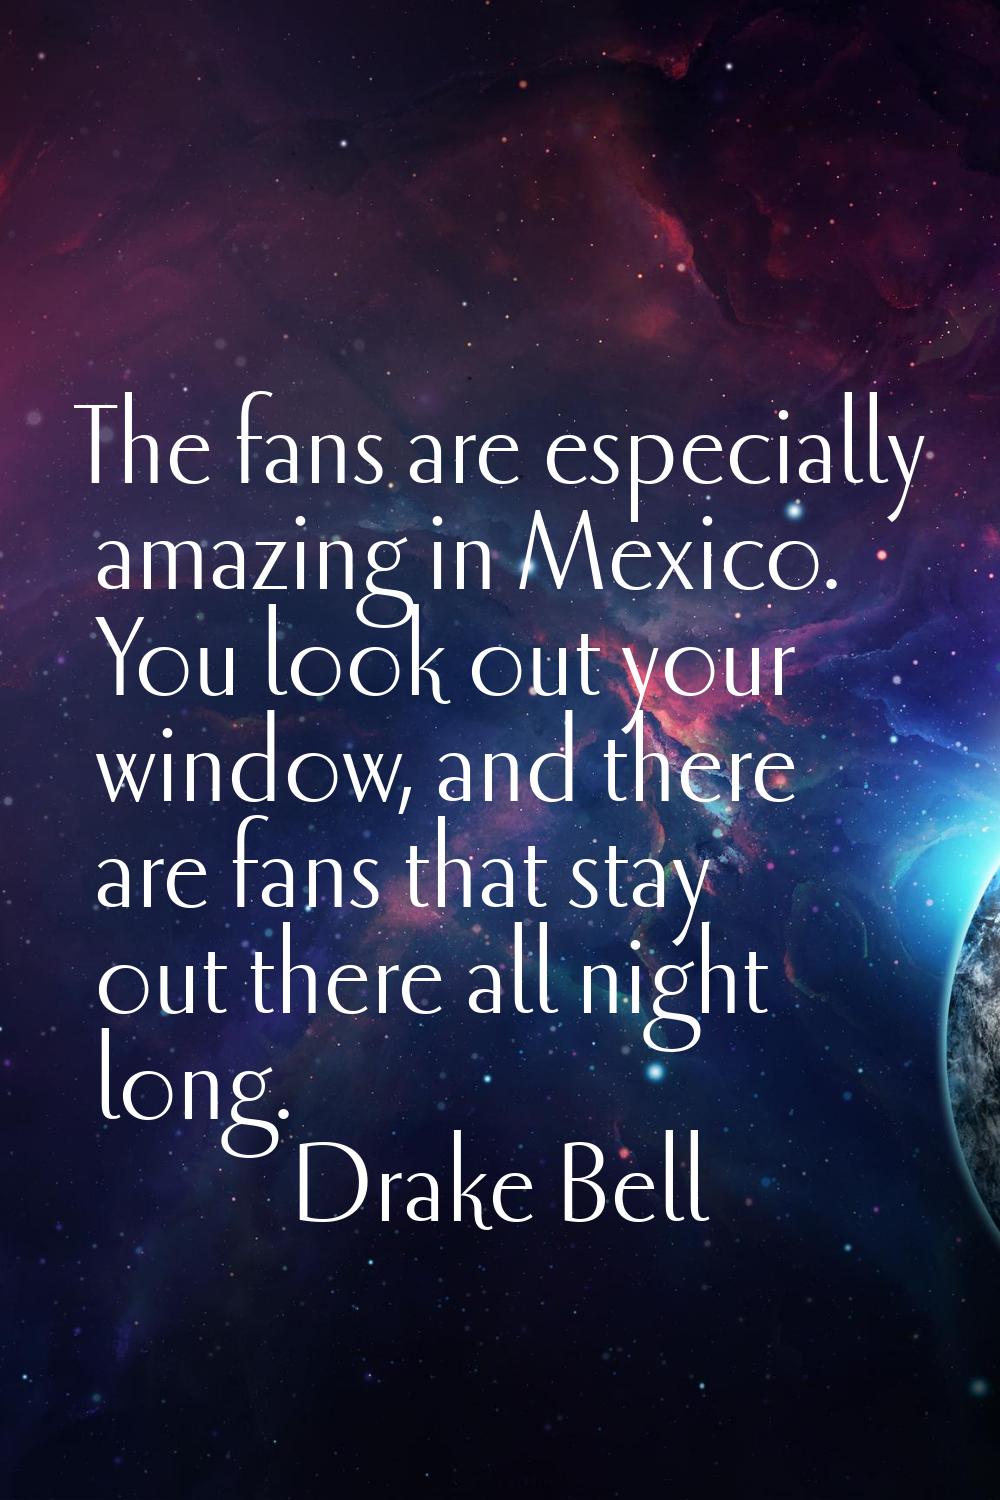 The fans are especially amazing in Mexico. You look out your window, and there are fans that stay o